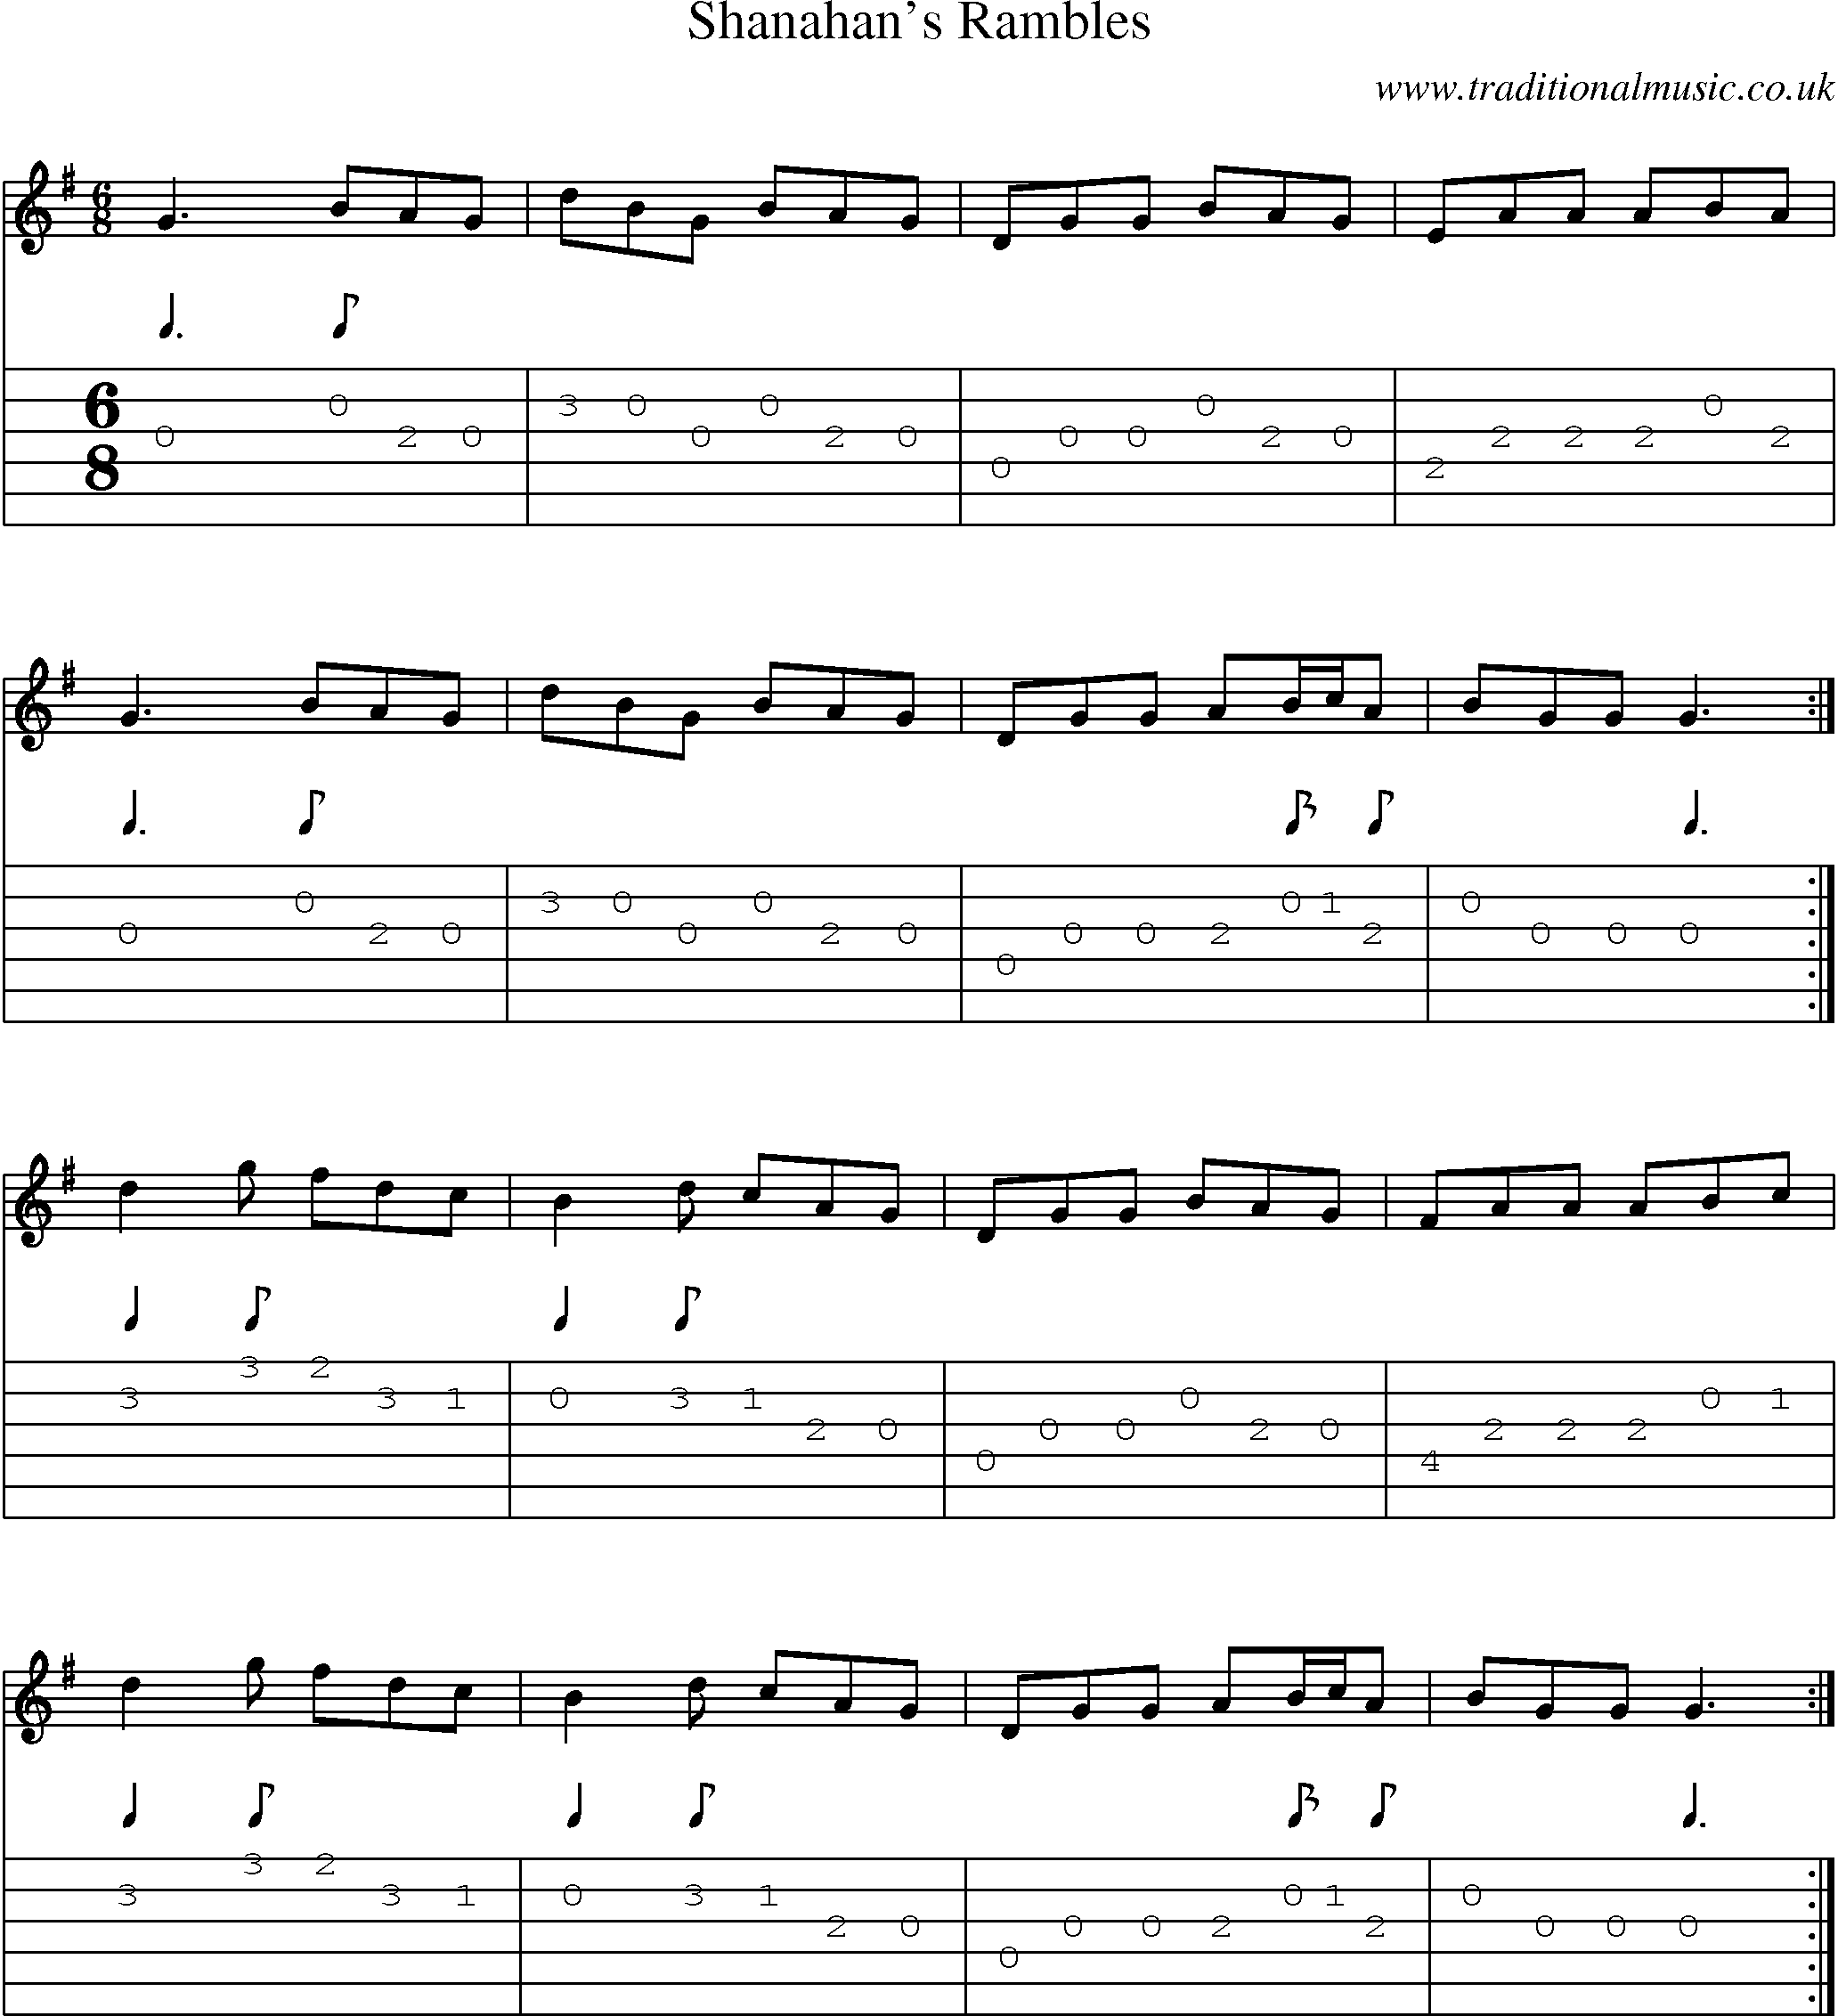 Music Score and Guitar Tabs for Shanahans Rambles